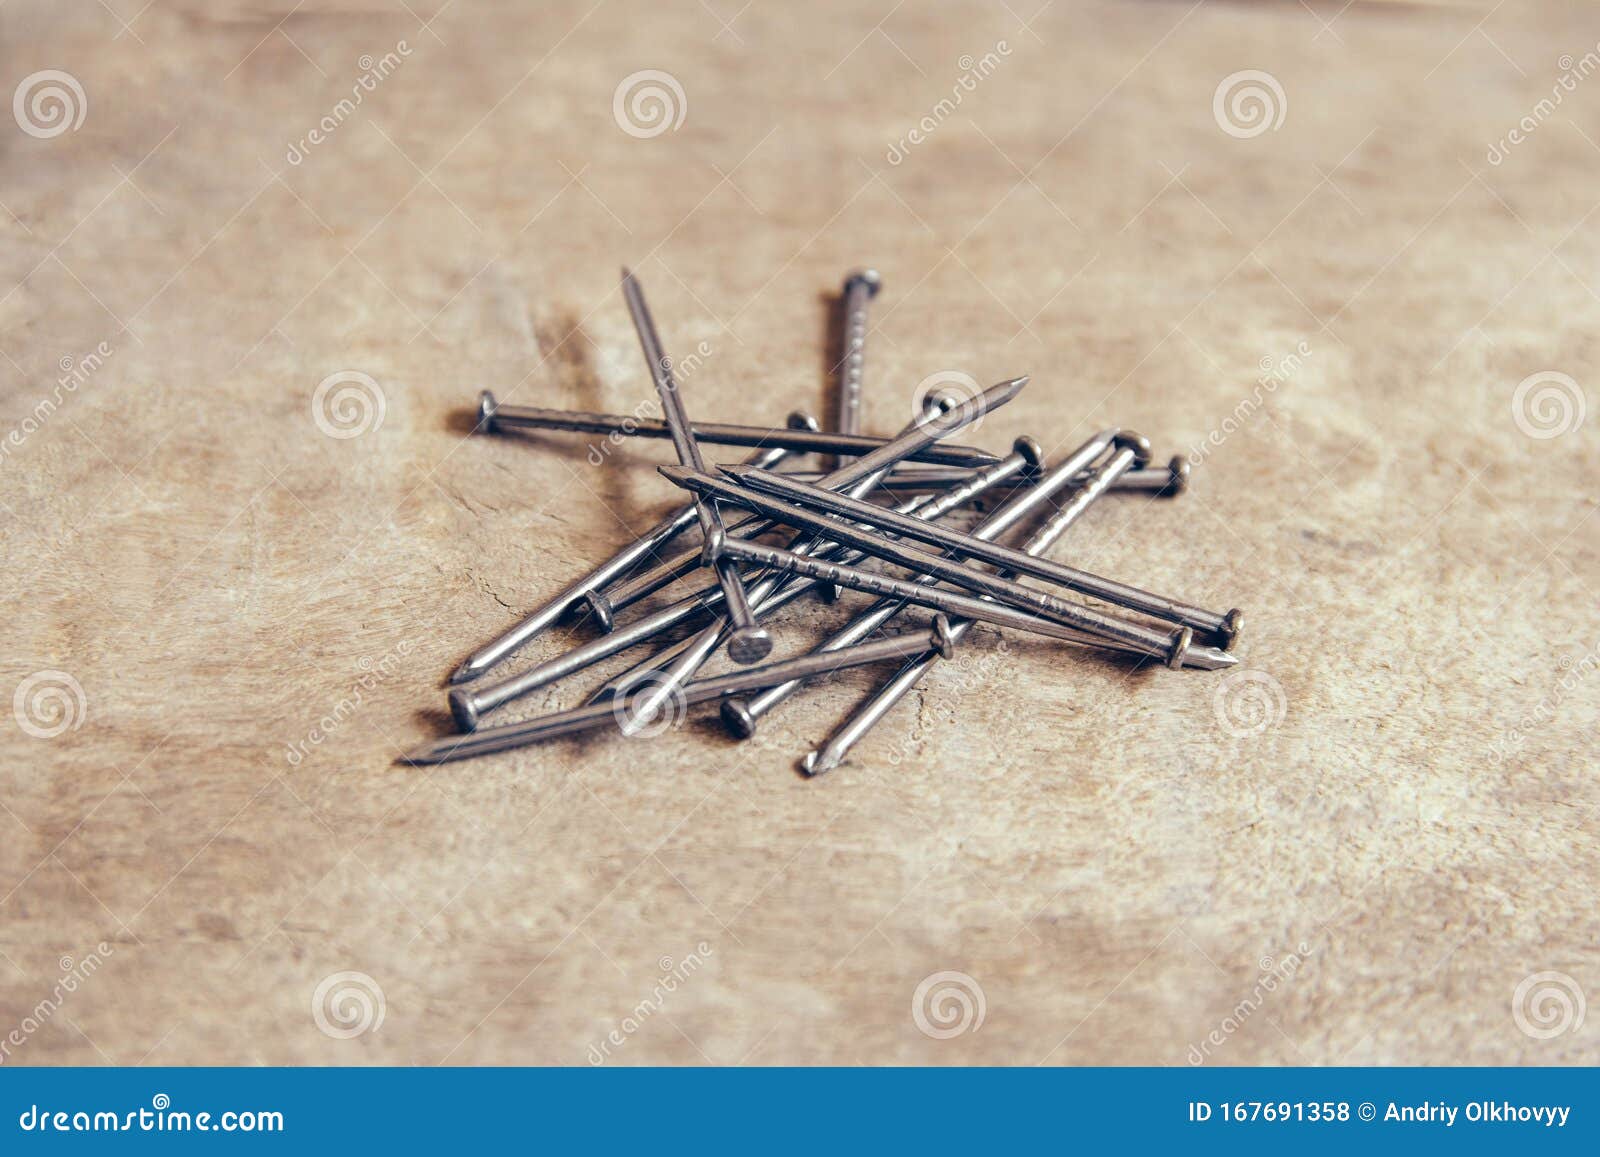 Pile Of Metal Nails On Wooden Background Stock Photo - Image of iron ...